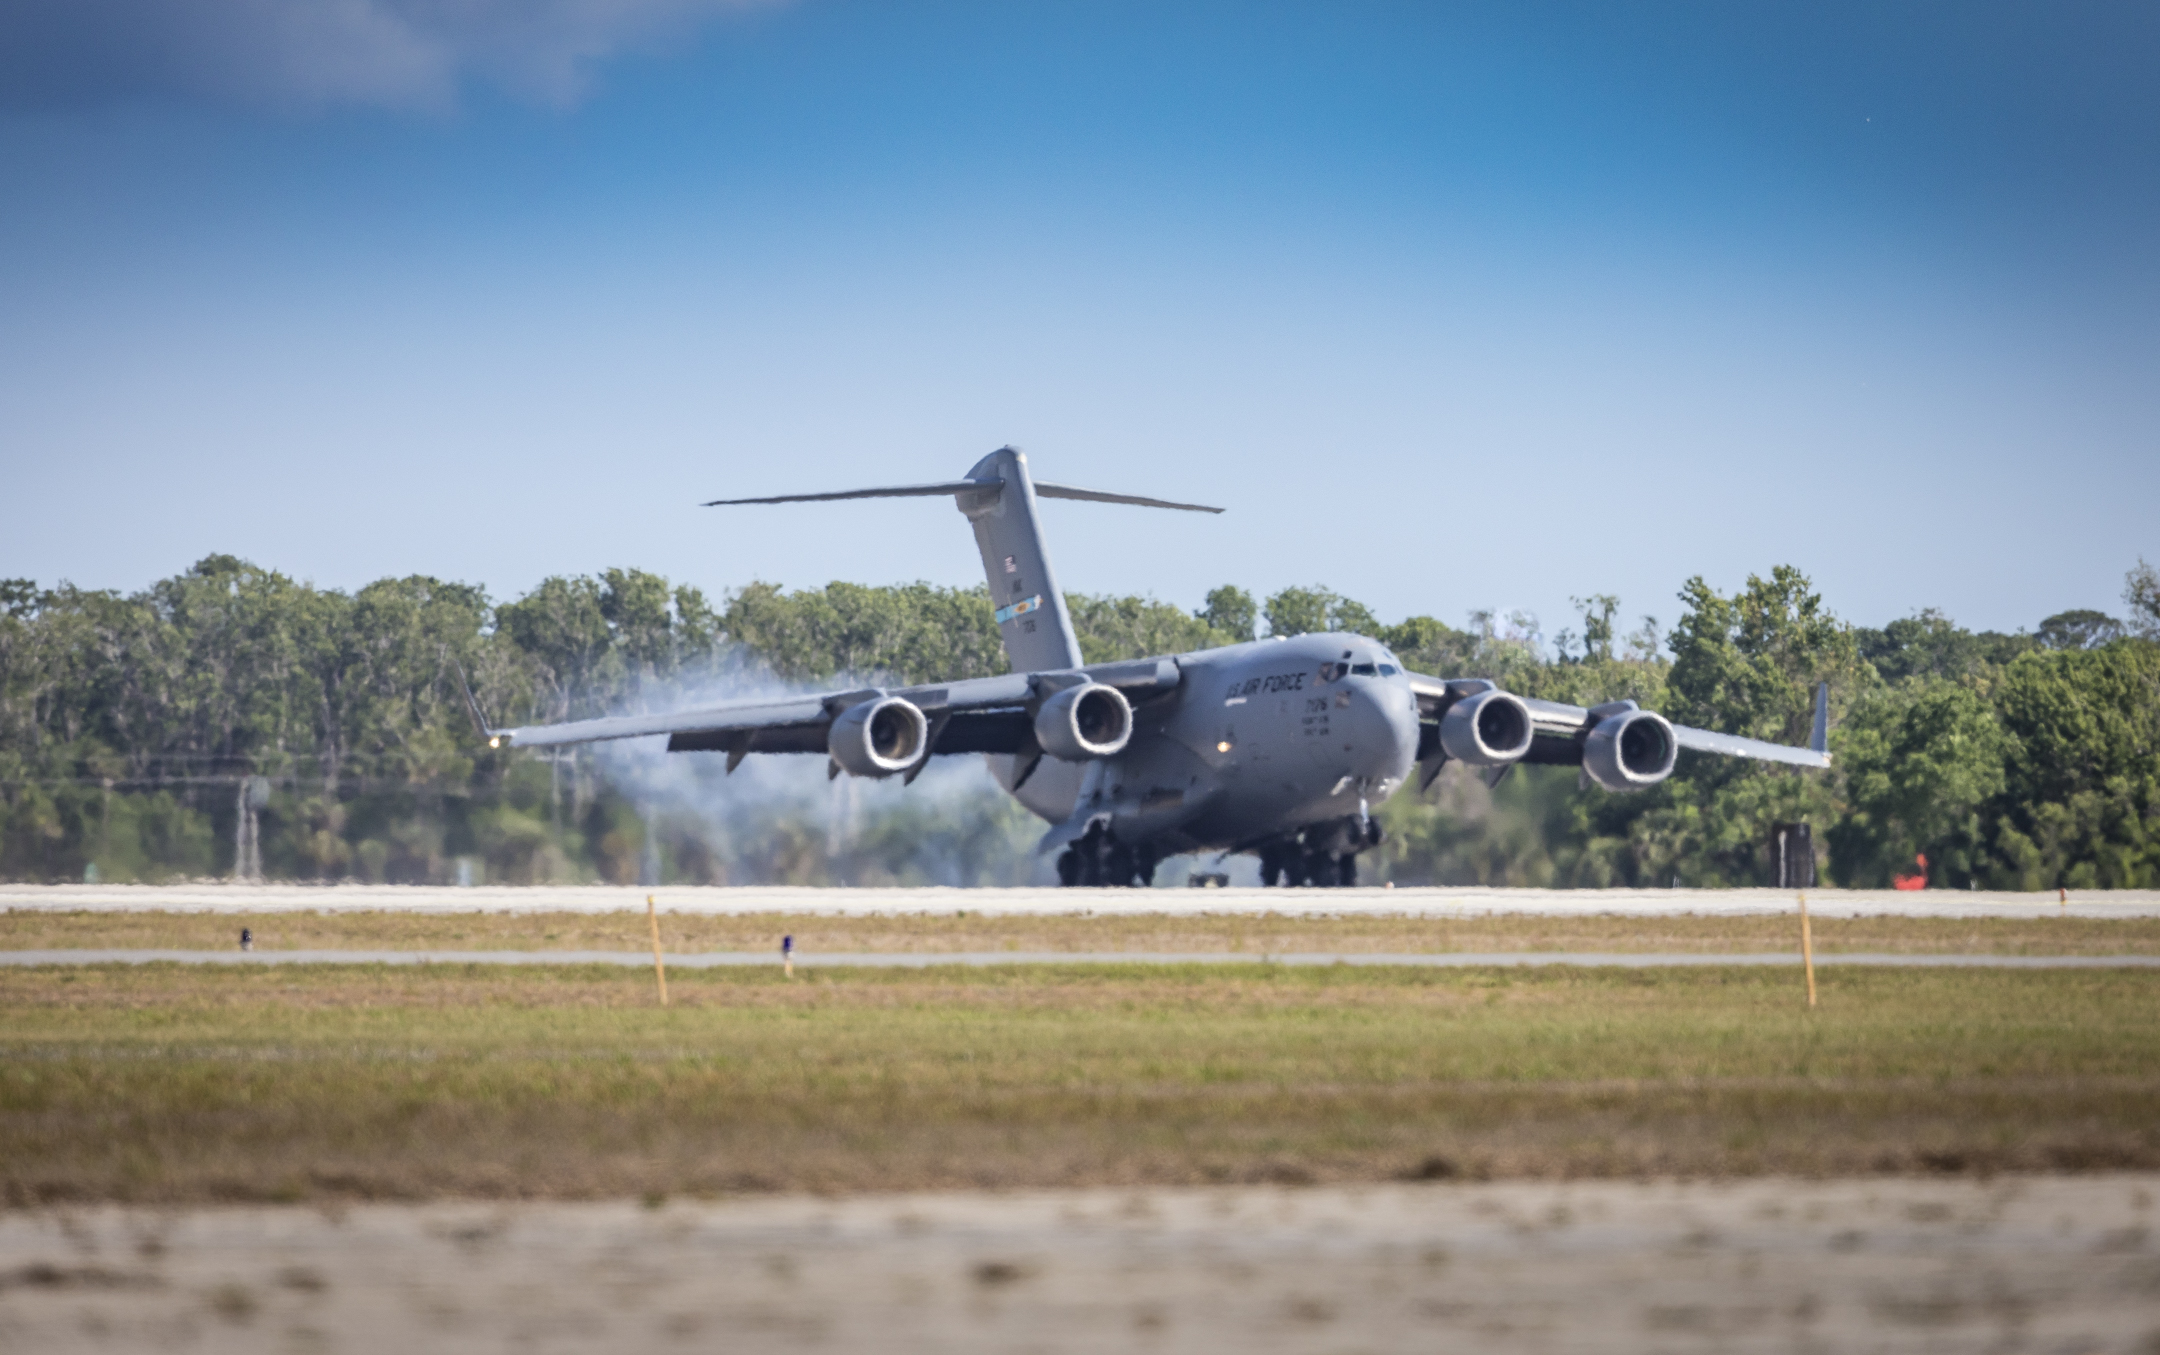 A C-17 from the United States Air Force’s 436th Airlift Wing, carrying NASA’s Parker Solar Probe, lands at 10:40 a.m. EDT at Space Coast Regional Airport in Titusville, Florida, on the morning of April 3, 2018. After landing, the spacecraft was unloaded and taken to Astrotech Space Operations, also in Titusville, for pre-launch testing and preparations. 